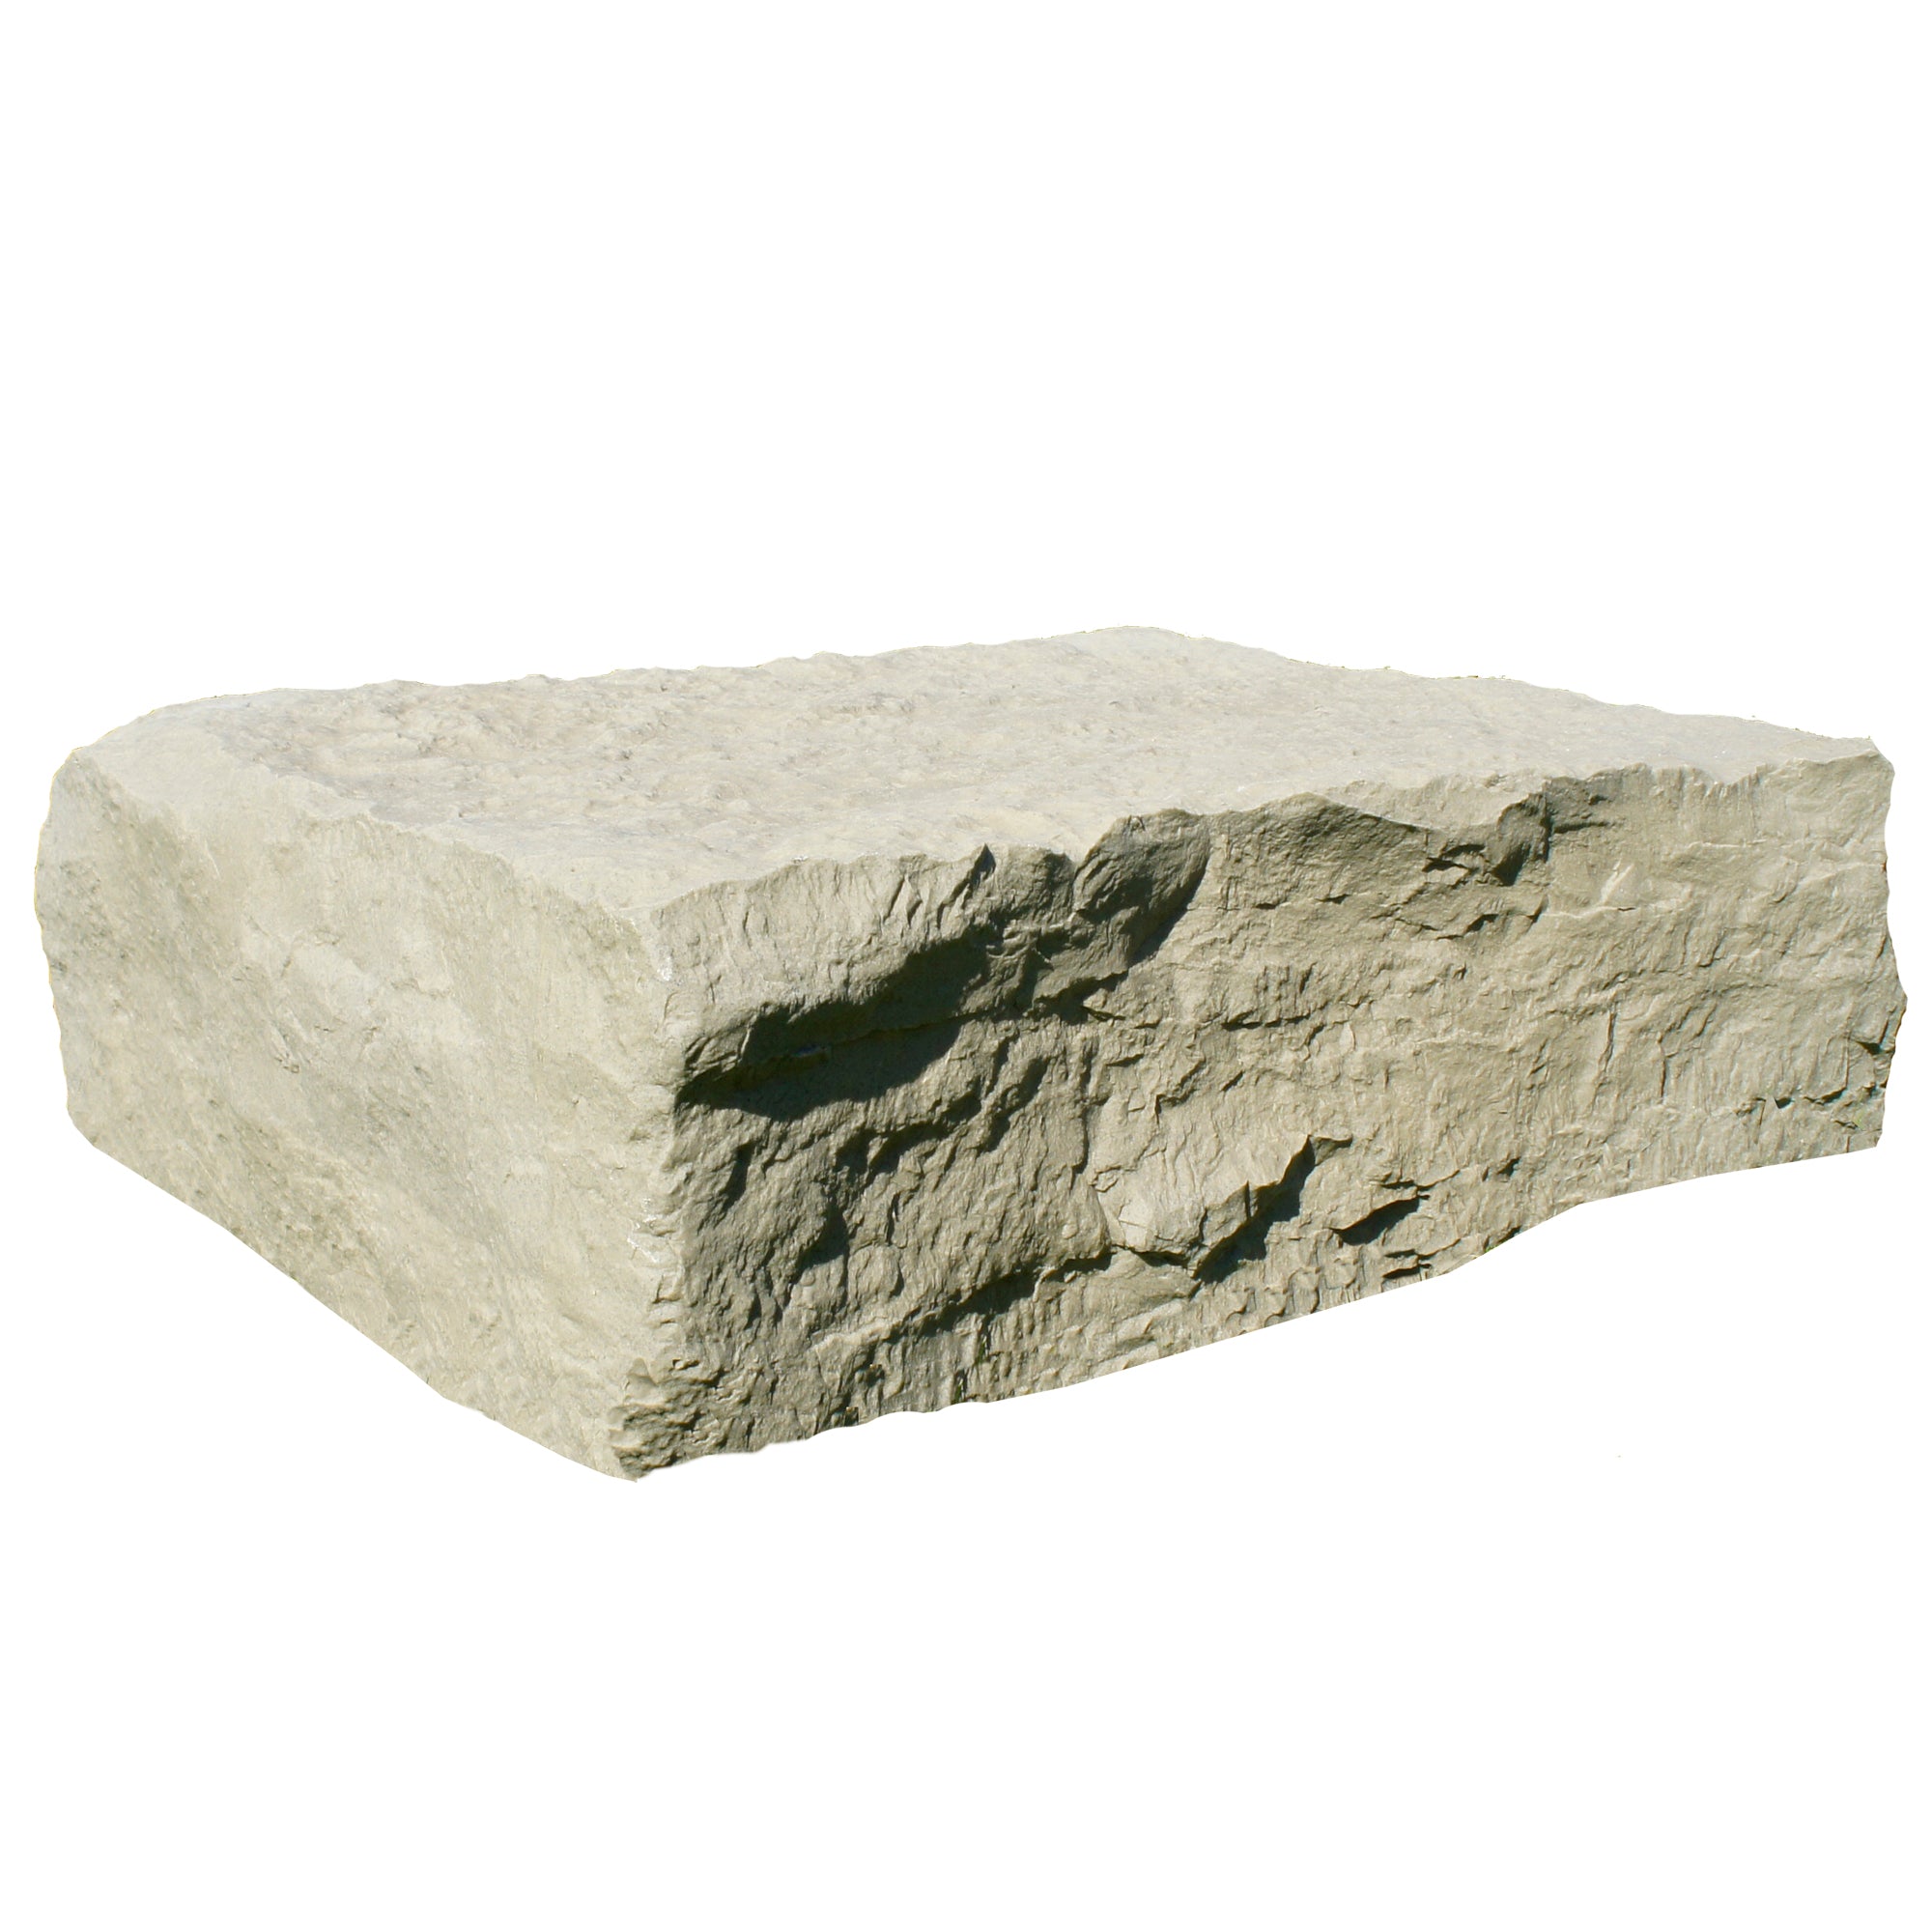 extra large landscape rock in sandstone on a white background